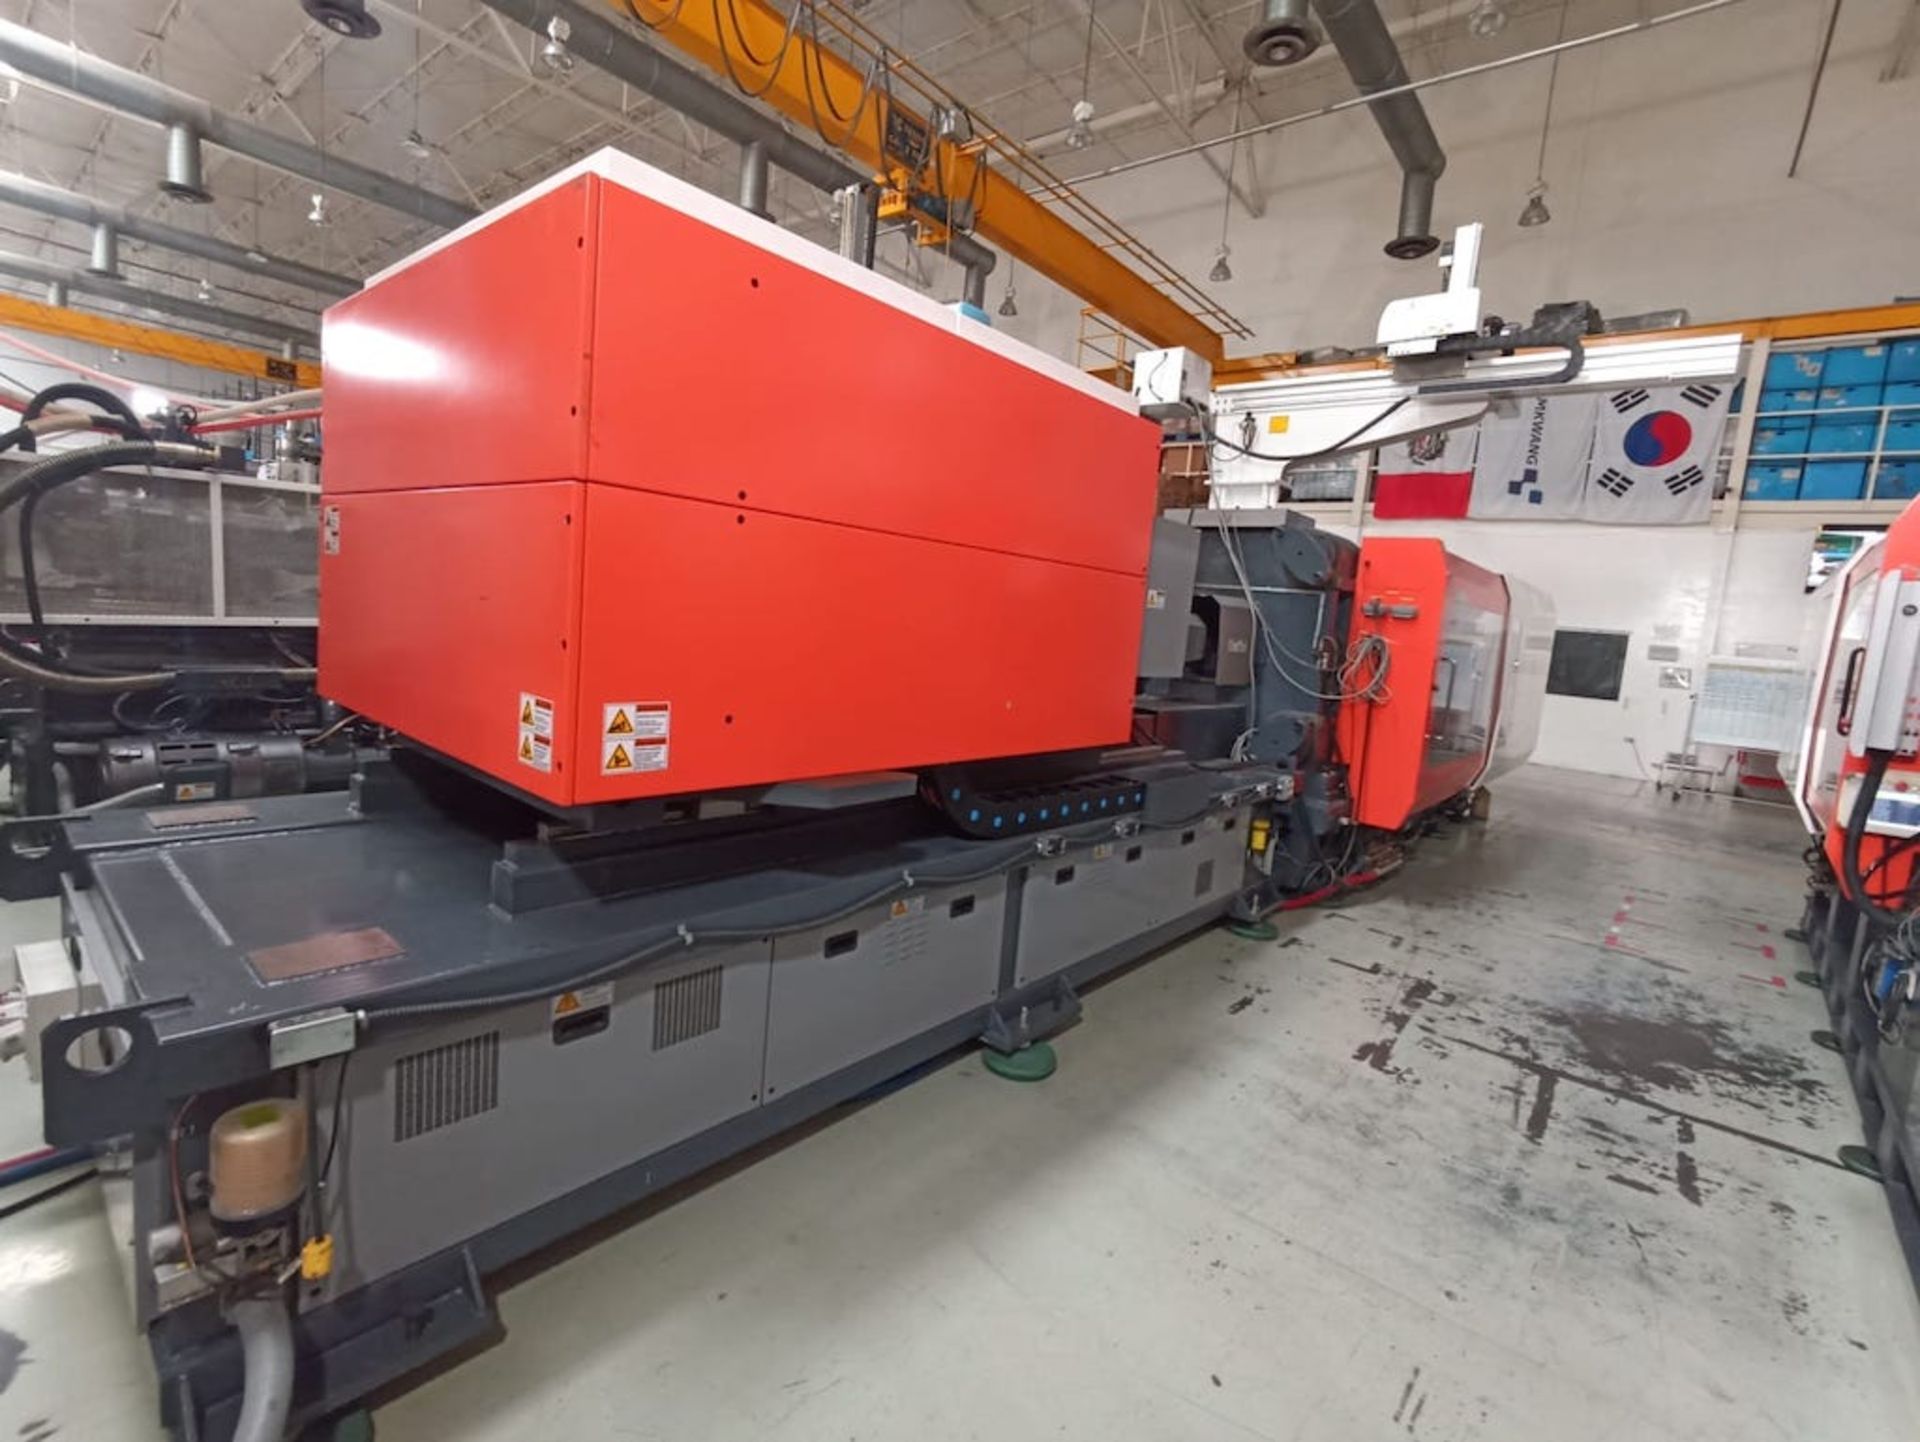 LS 550 Ton All Electric Injection Molding Press, New in 2014 - Image 2 of 3